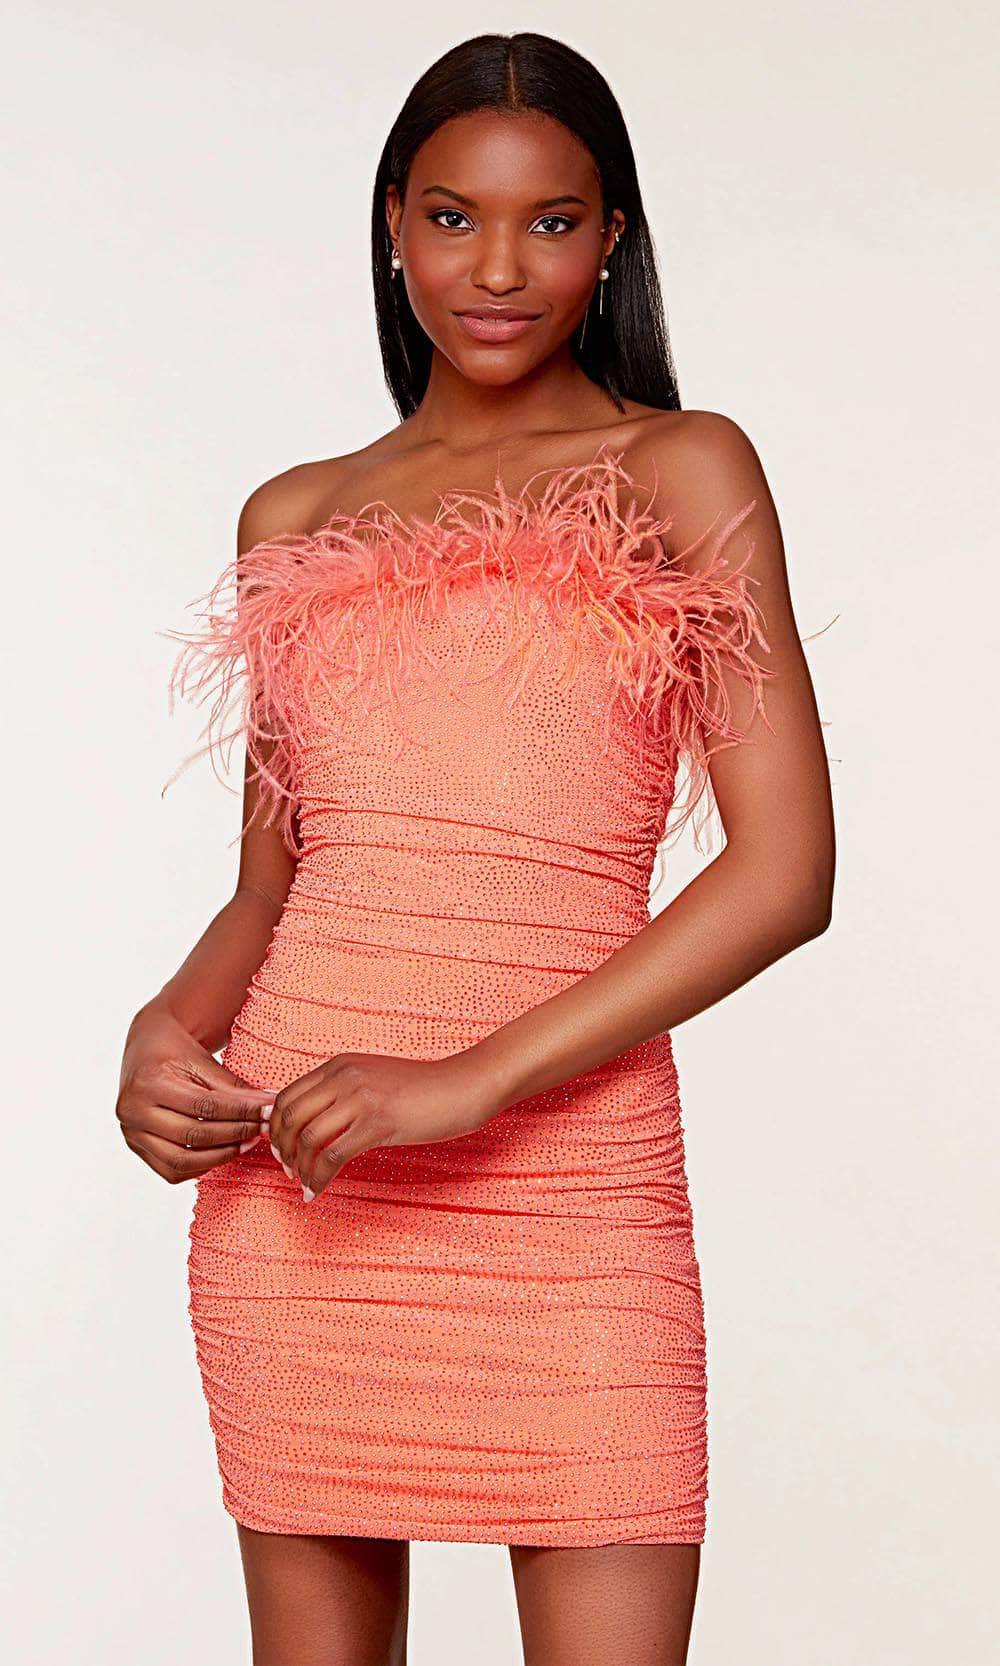 Alyce Paris 4728 - Feather Trimmed Homecoming Dress
